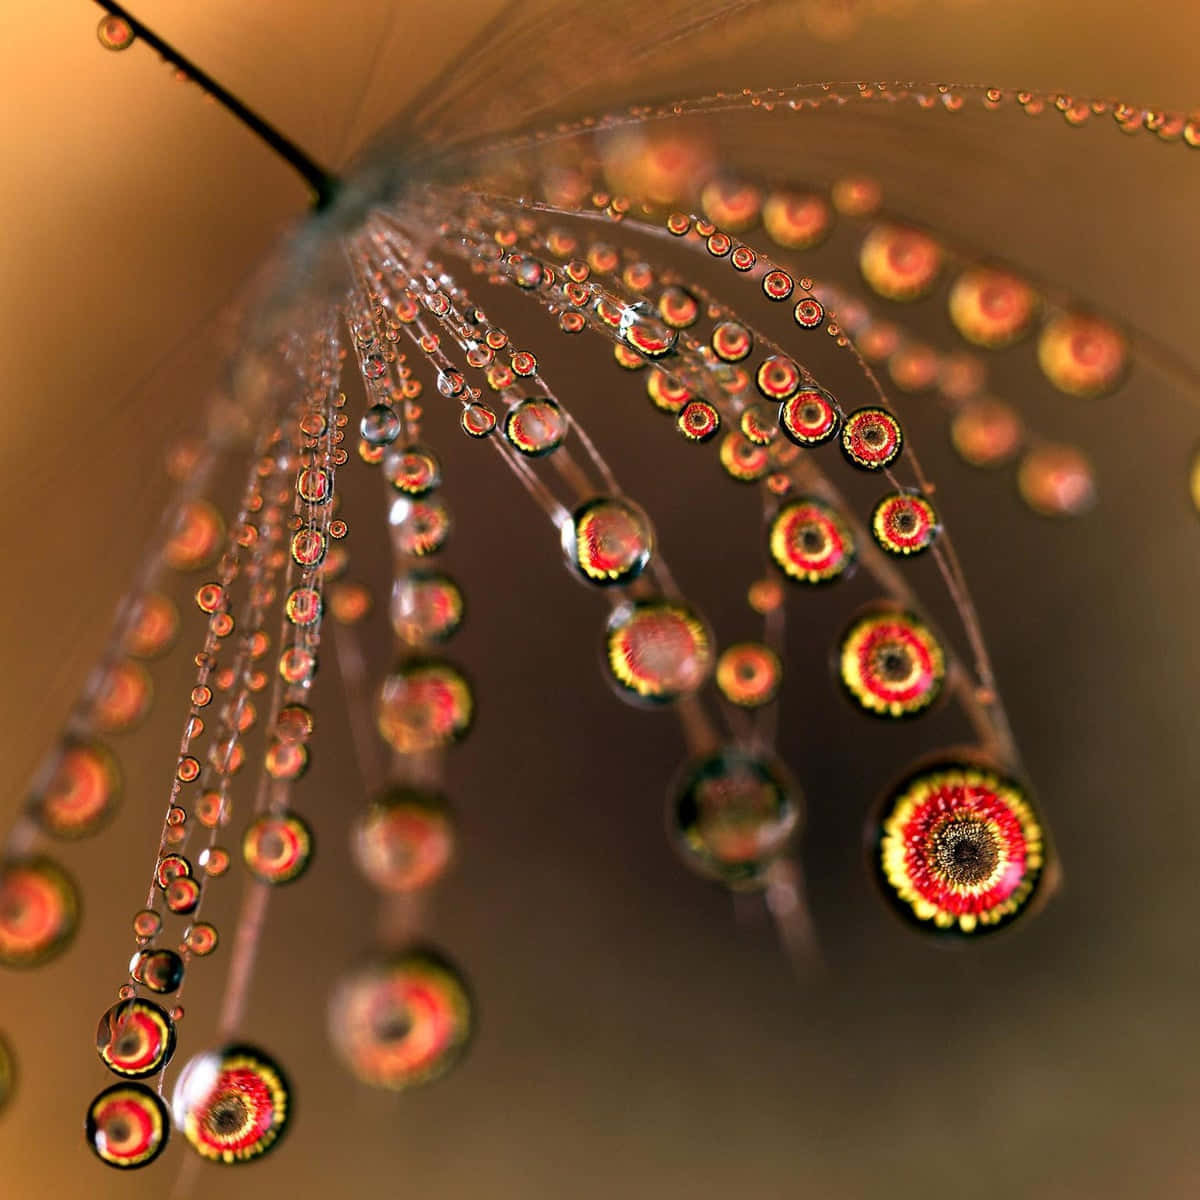 A mesmerizing close-up of dewdrops on a vibrant green leaf Wallpaper